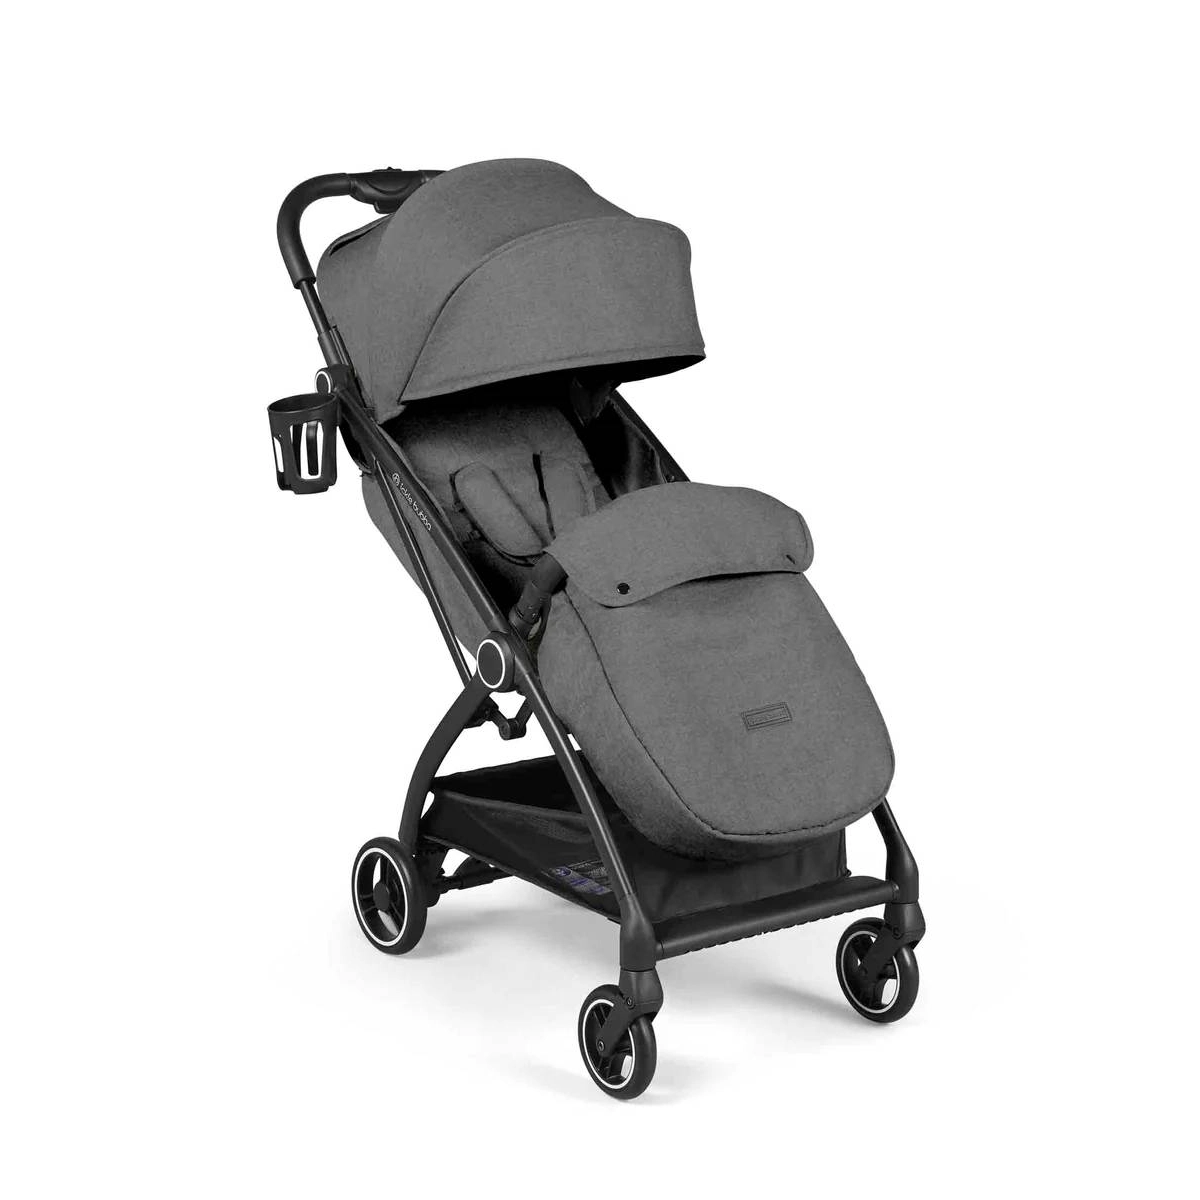 Ickle Bubba Aries Max Autofold Stroller